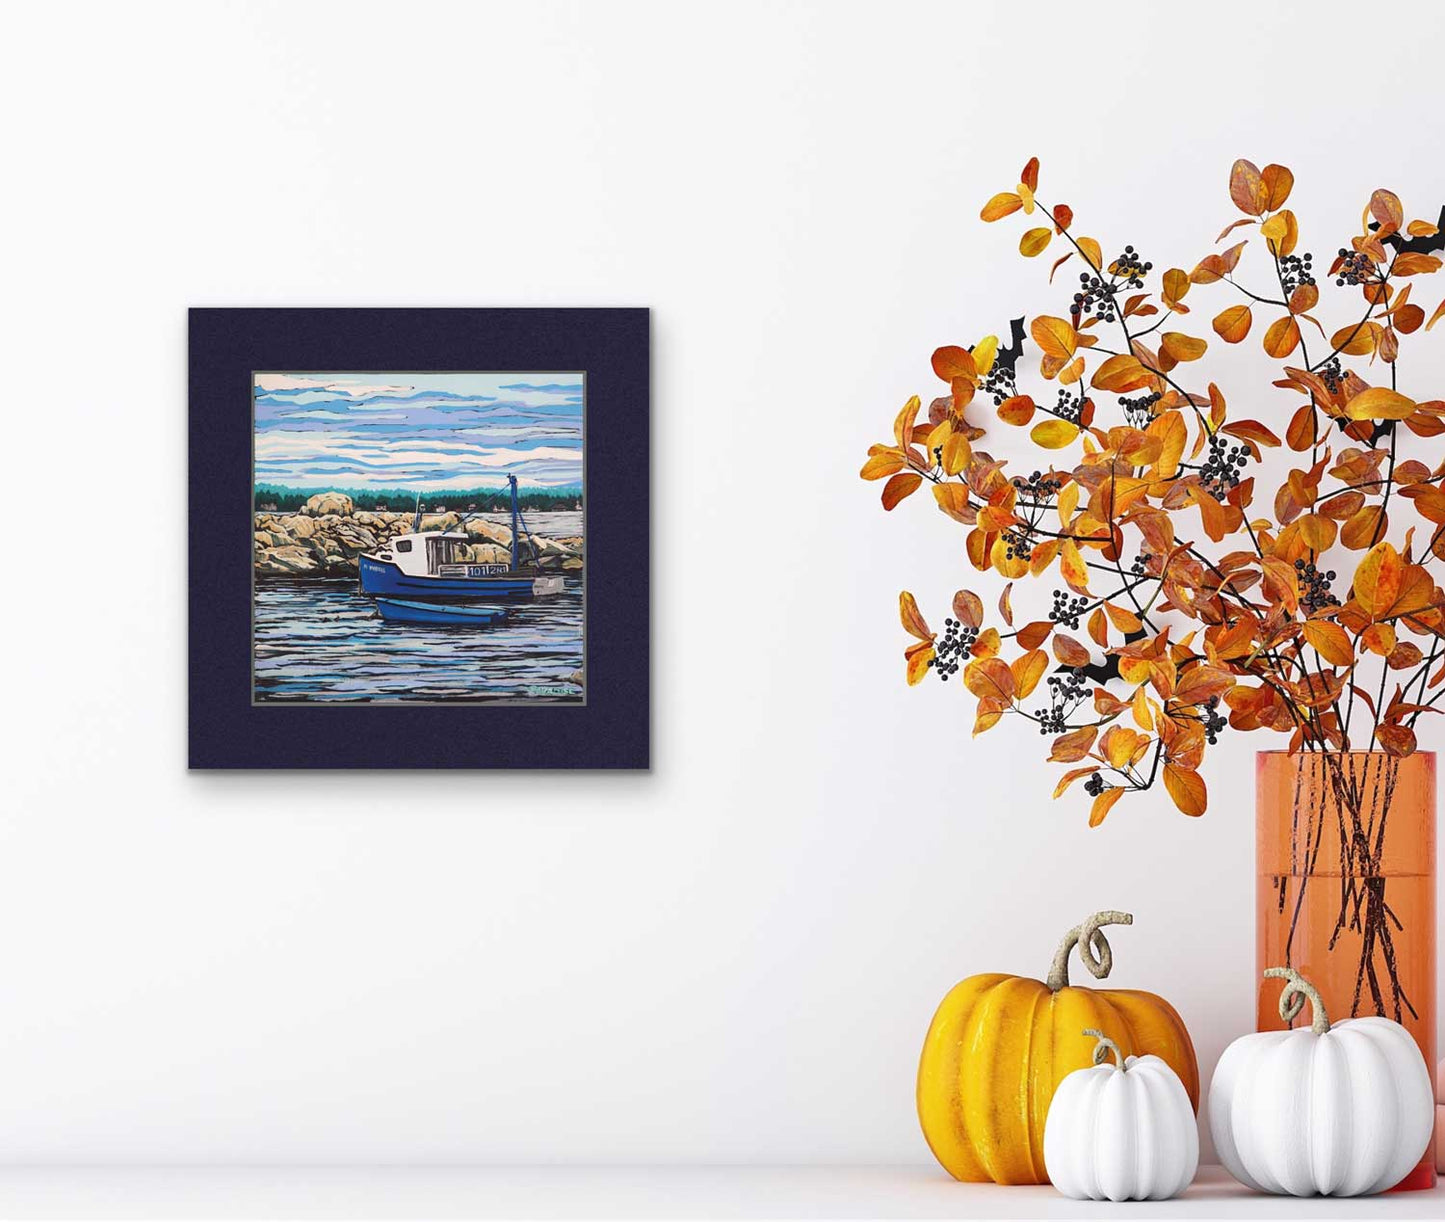 Blue Fishing Boat at Blue Rocks Nova Scotia on the Atlantic coast, high quality print from an original painting by a professional Canadian landscape artist. visual art ready to hang on your wall.